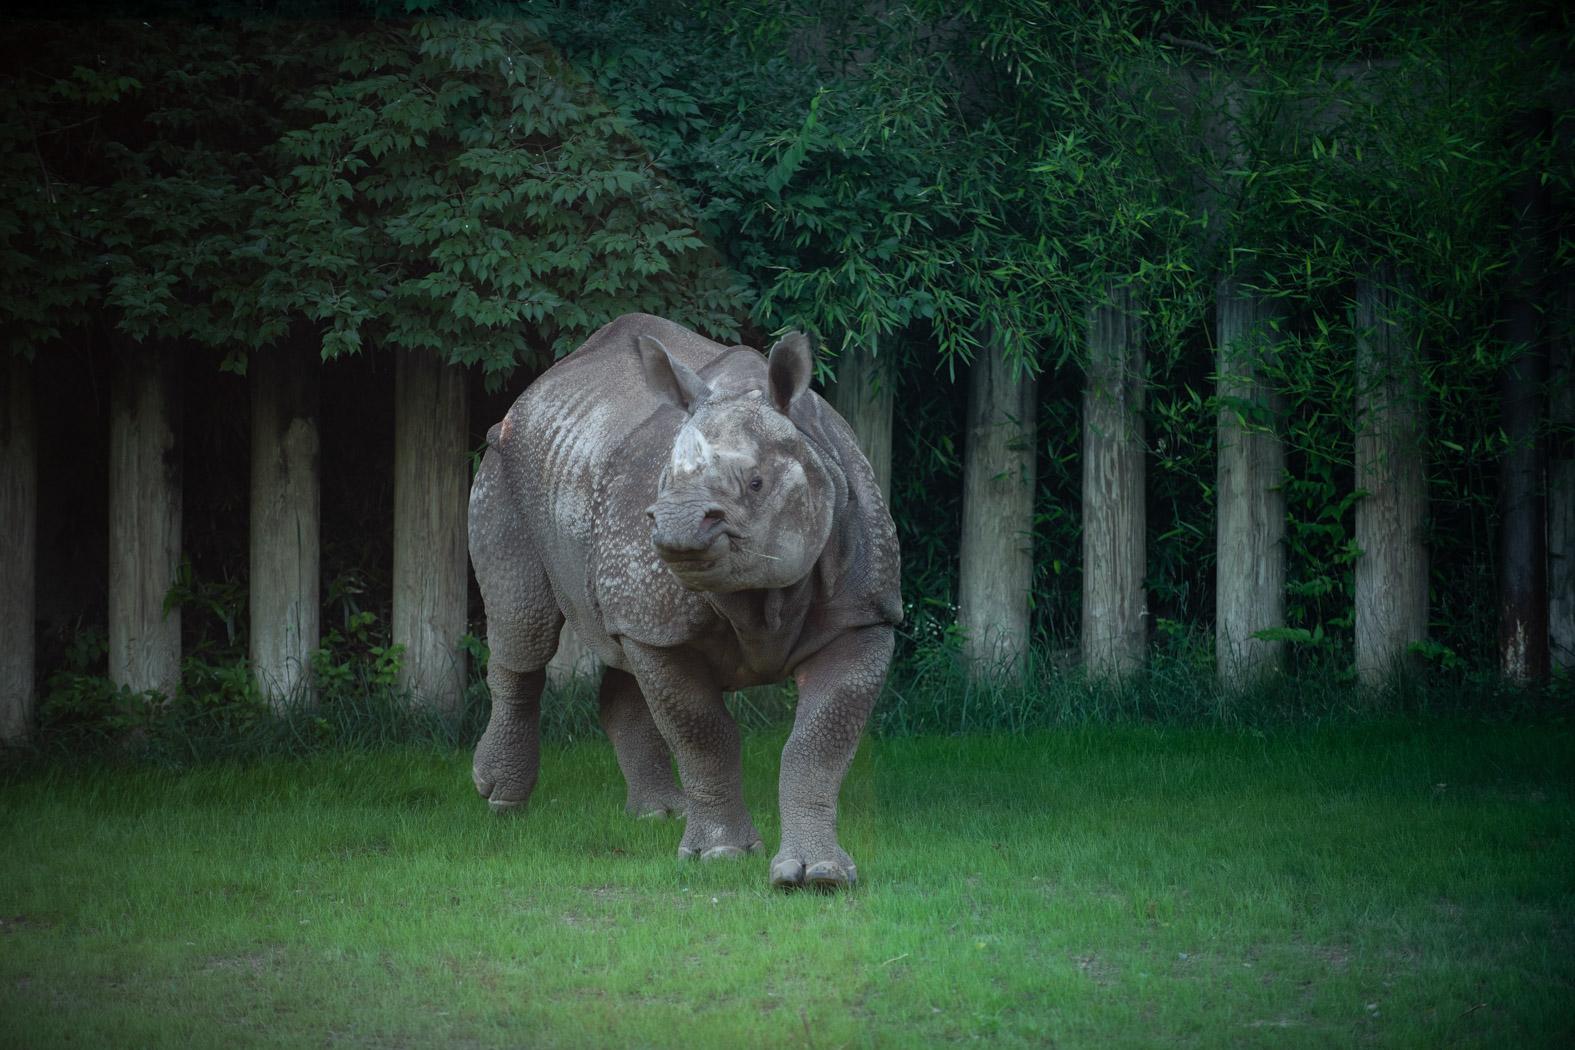 https://www.thewilds.org/sites/default/files/styles/uncropped_xl/public/assets/news/Asian-One-Horned-Rhino-Brian-6115-Grahm-S.-Jones-Columbus-Zoo-and-Aquarium.jpg?itok=k7wcHs5n